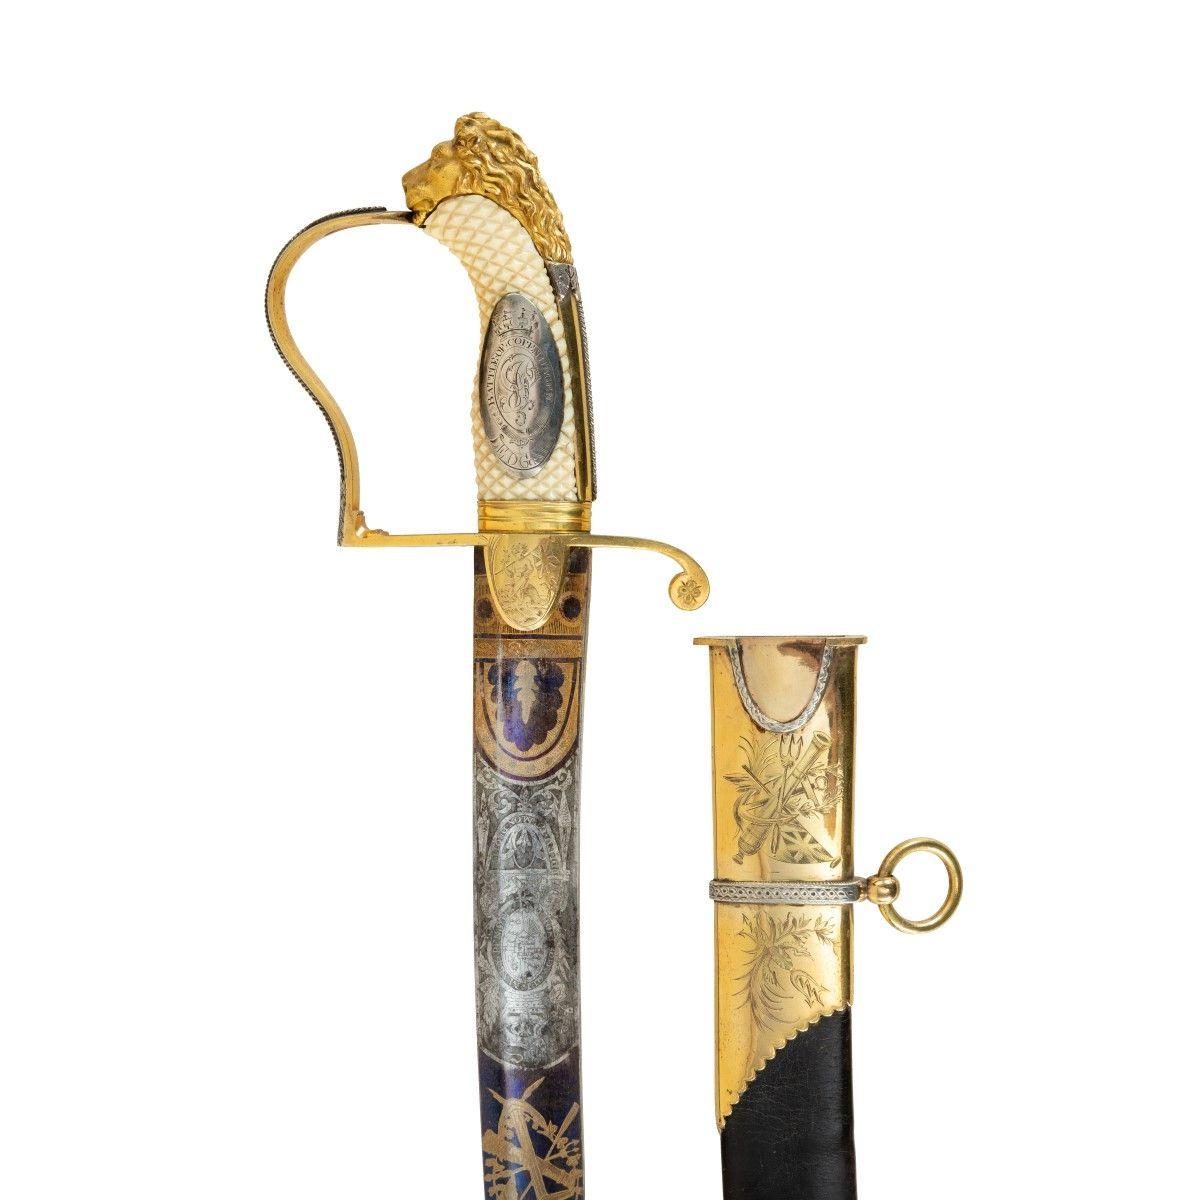 This curved sword has a blued steel German blade with an ivory cross-hatched grip bearing silver and gilt mounts in the form of a lion’s head and mane. The grip is mounted with an oval silver plaque engraved with the coat of arms (1801-1816 pattern)